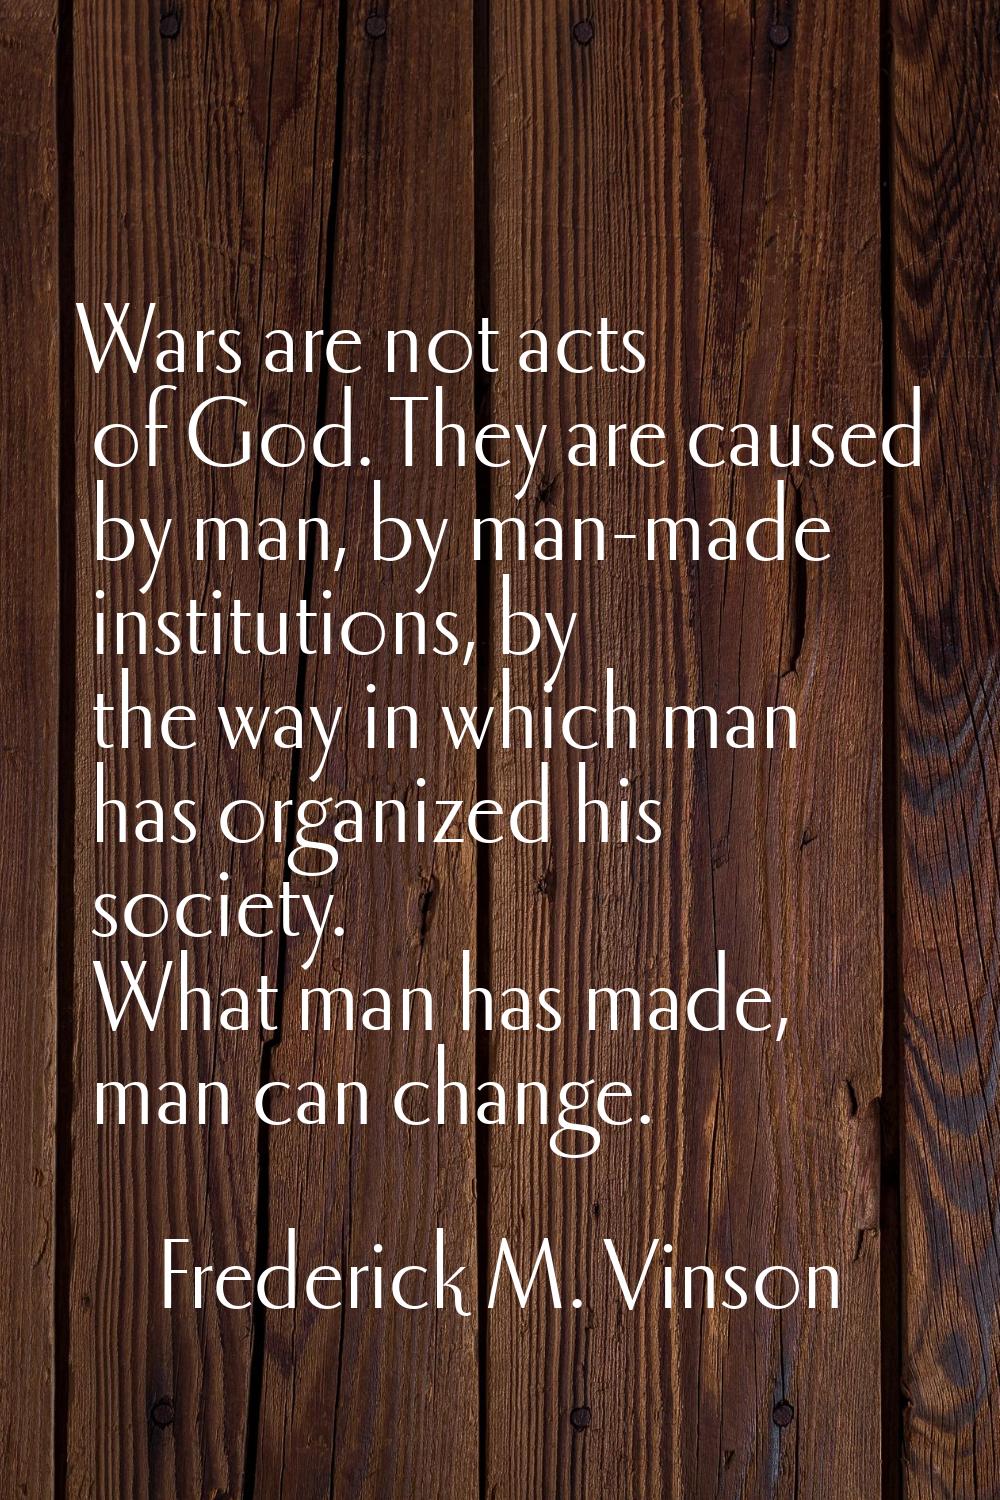 Wars are not acts of God. They are caused by man, by man-made institutions, by the way in which man